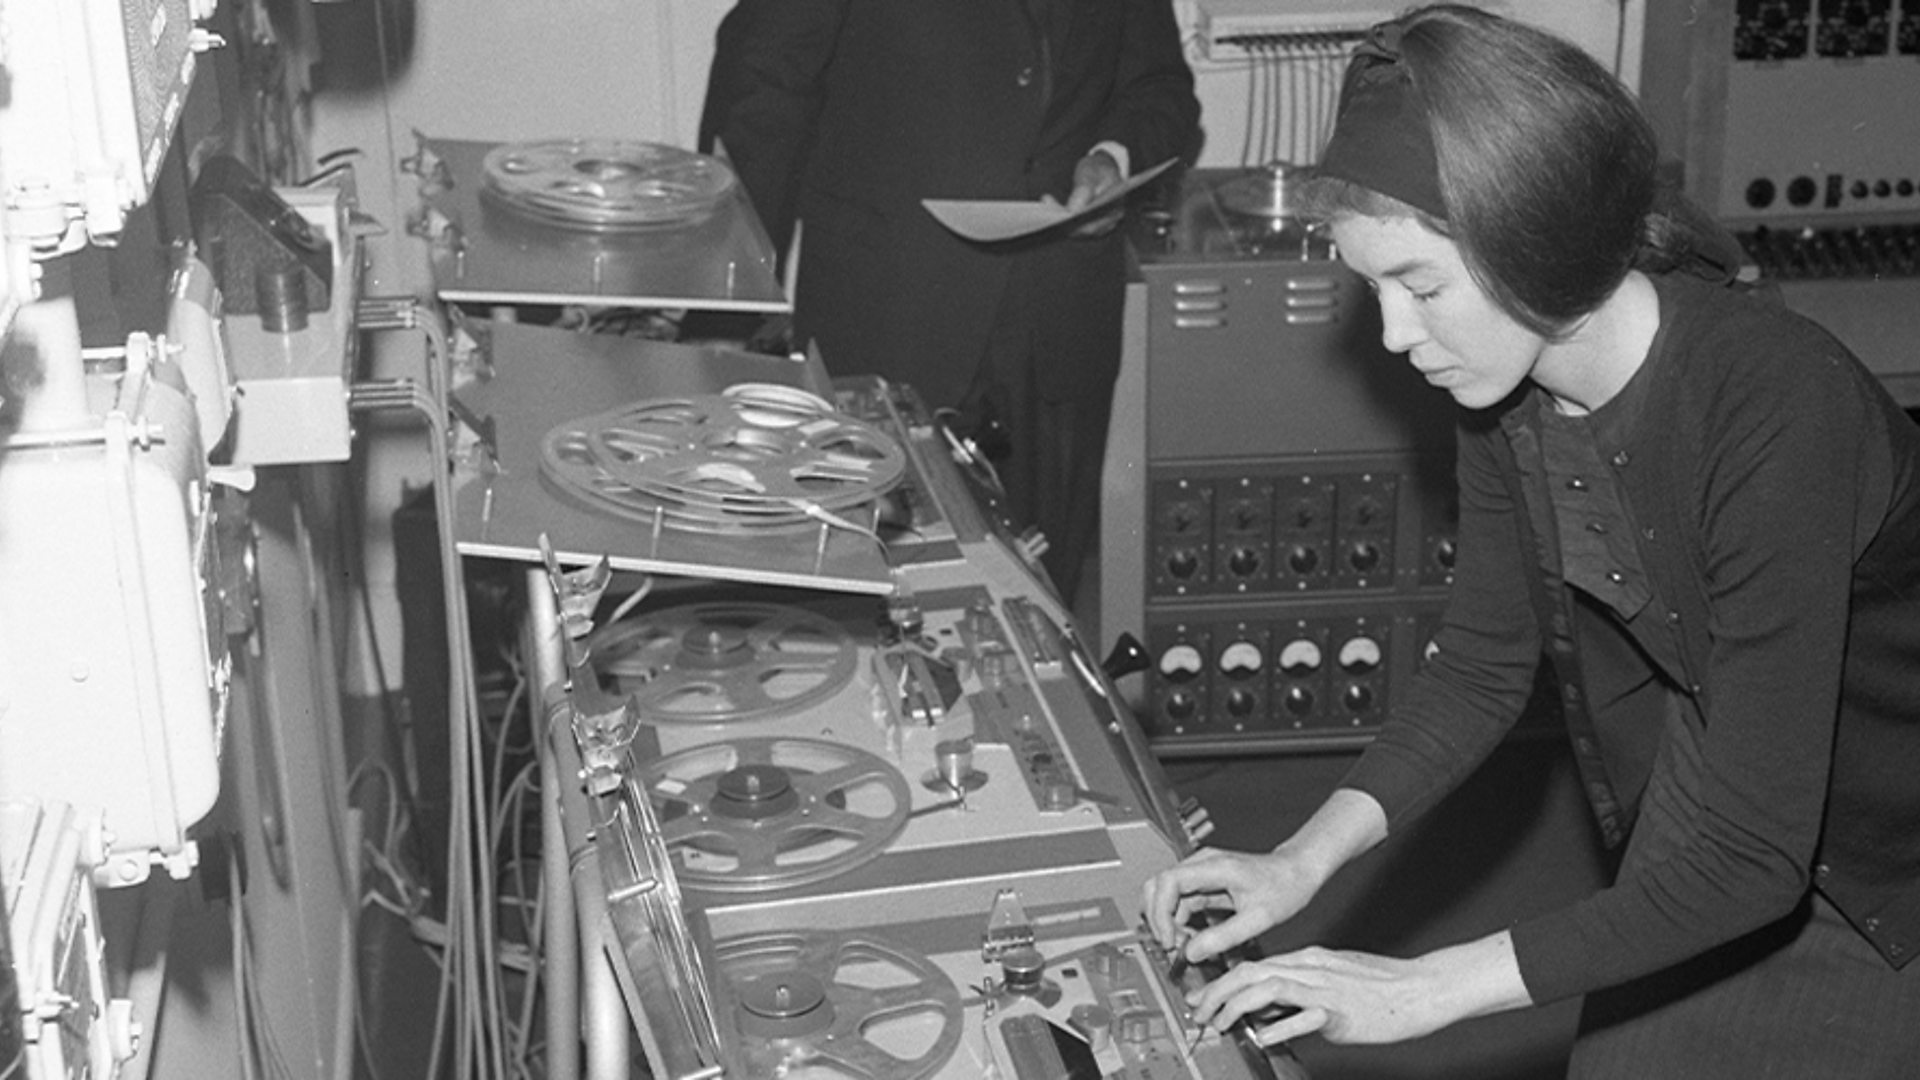 Image: Delia Derbyshire composes using multiple reel-to-reel tape machines in June 1965.